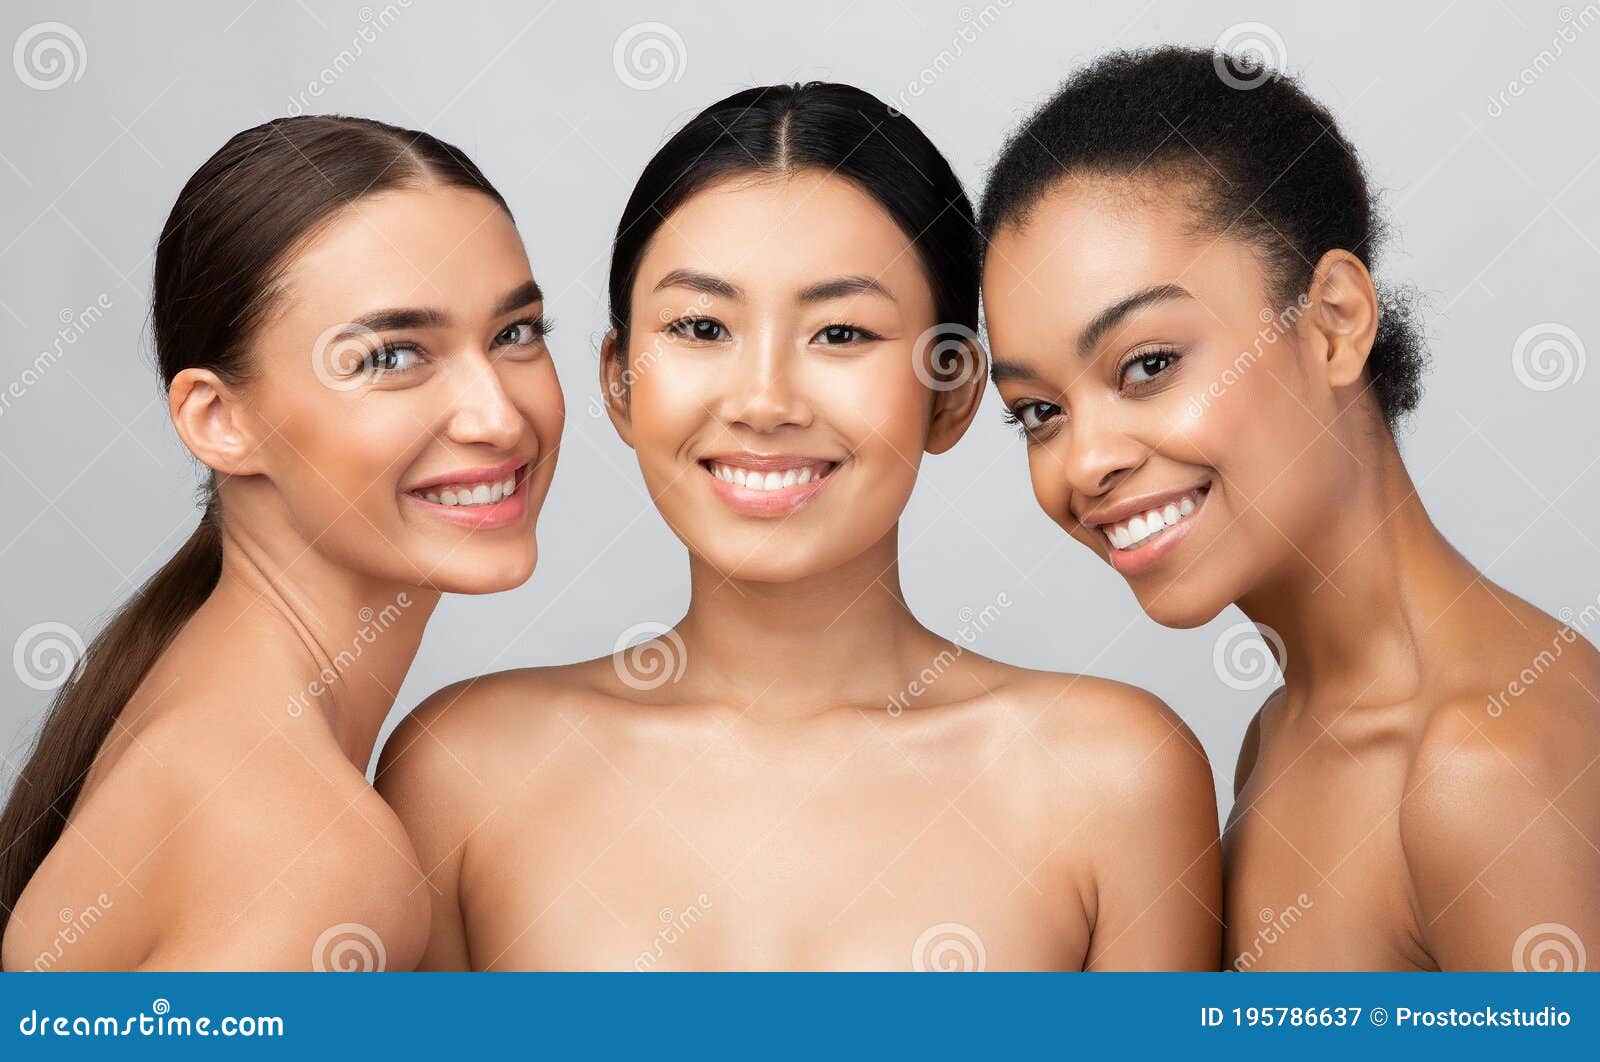 three gorgeous girls models posing naked standing over gray background